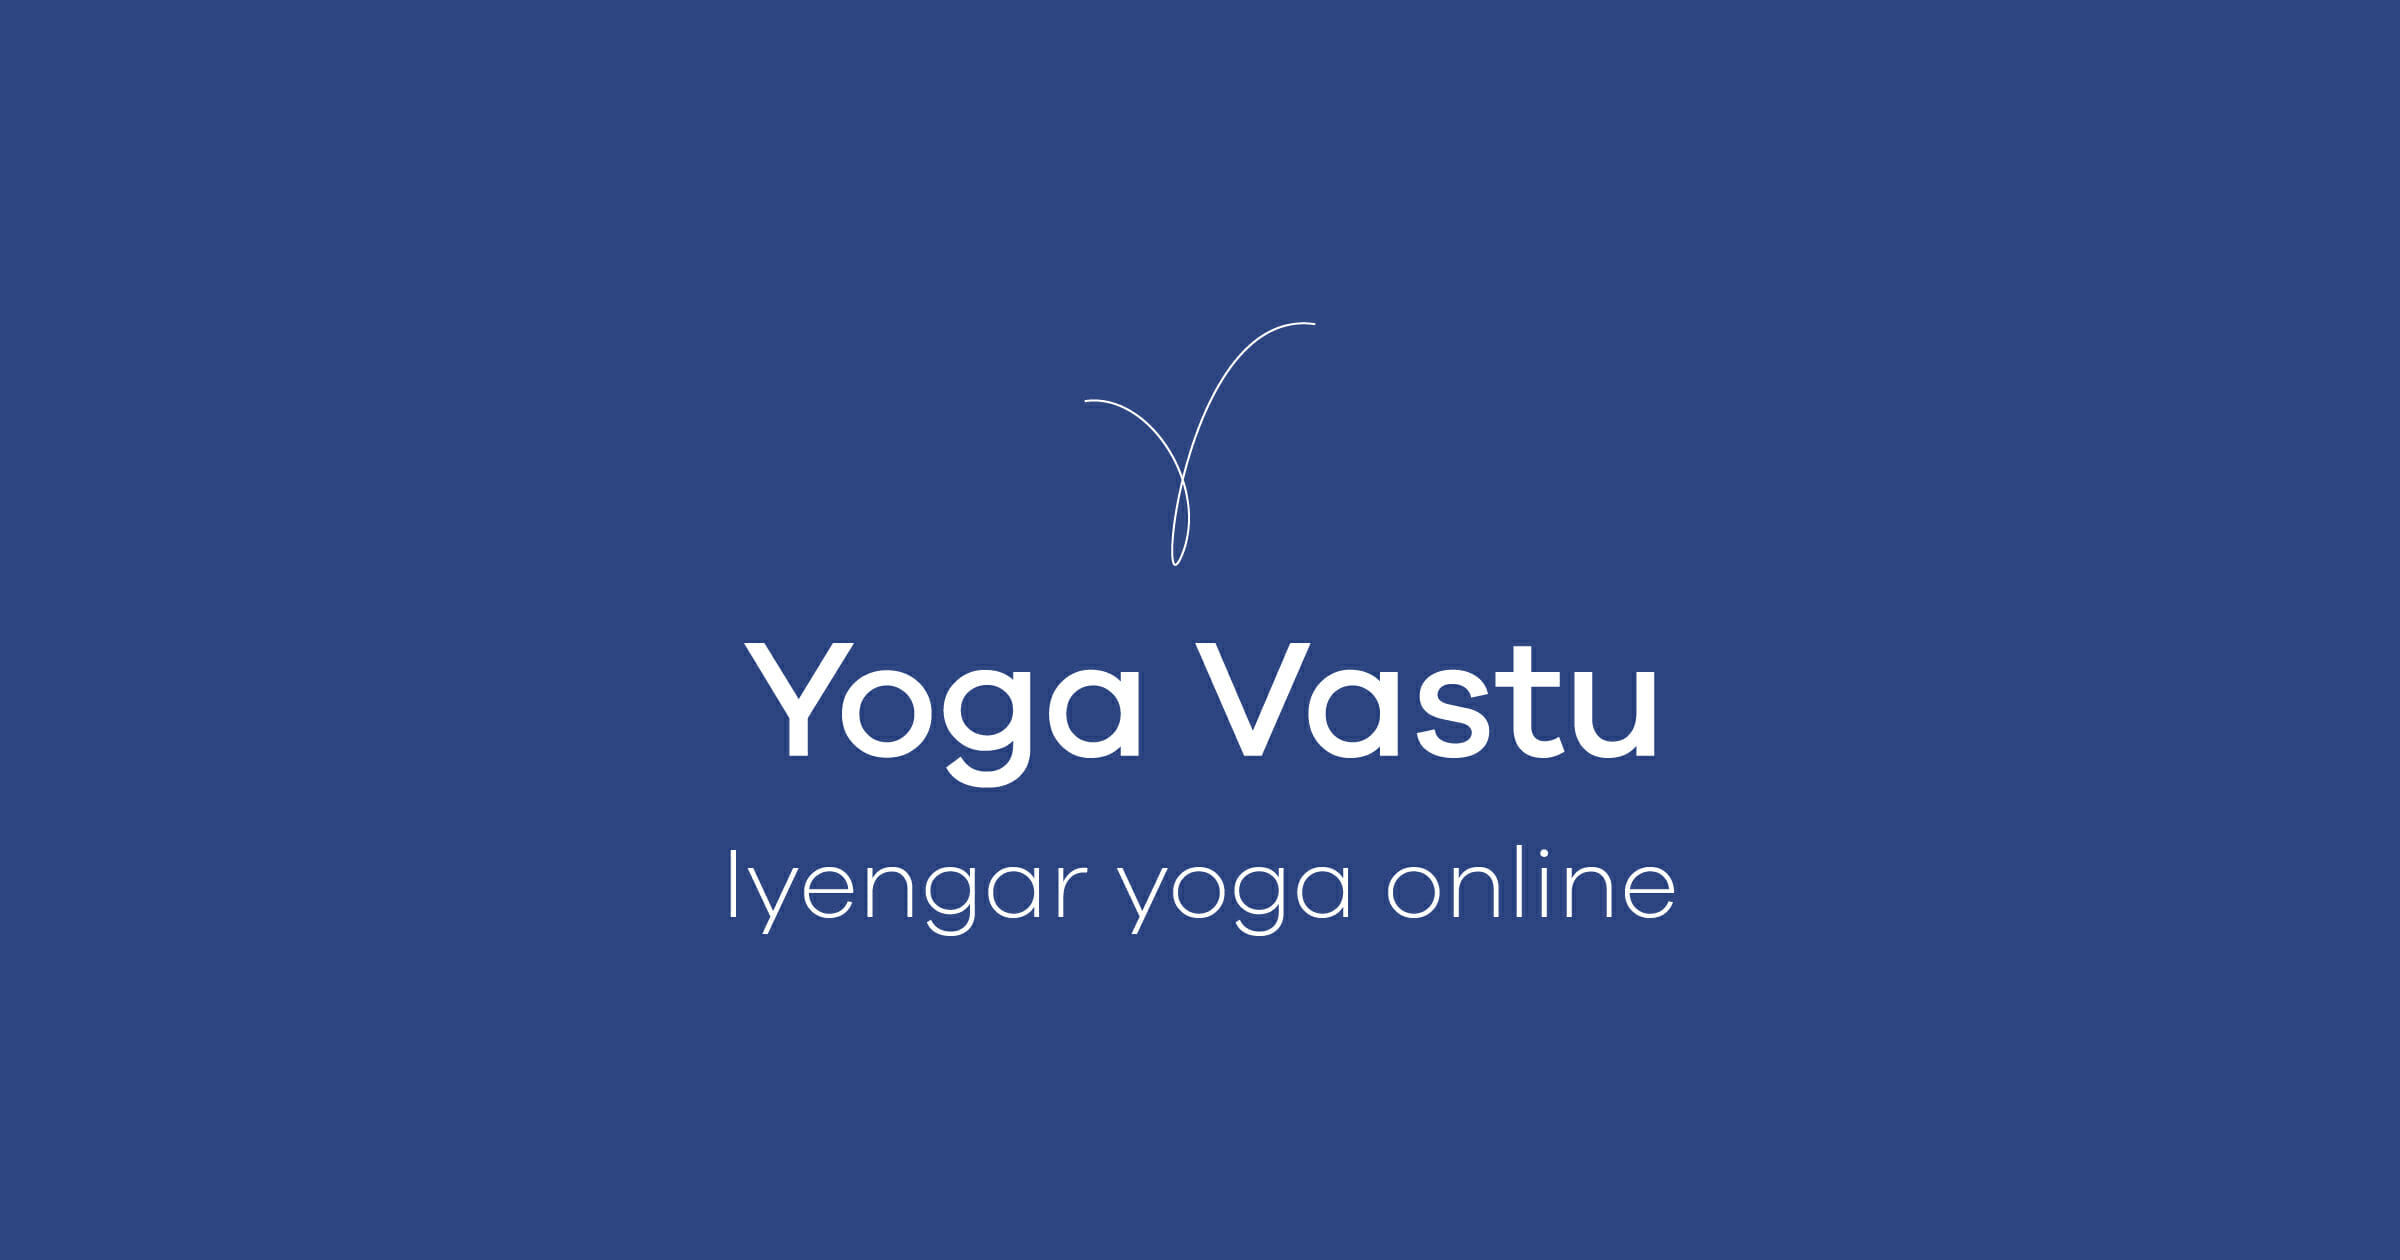 Learn How to Practise Iyengar Yoga at Home